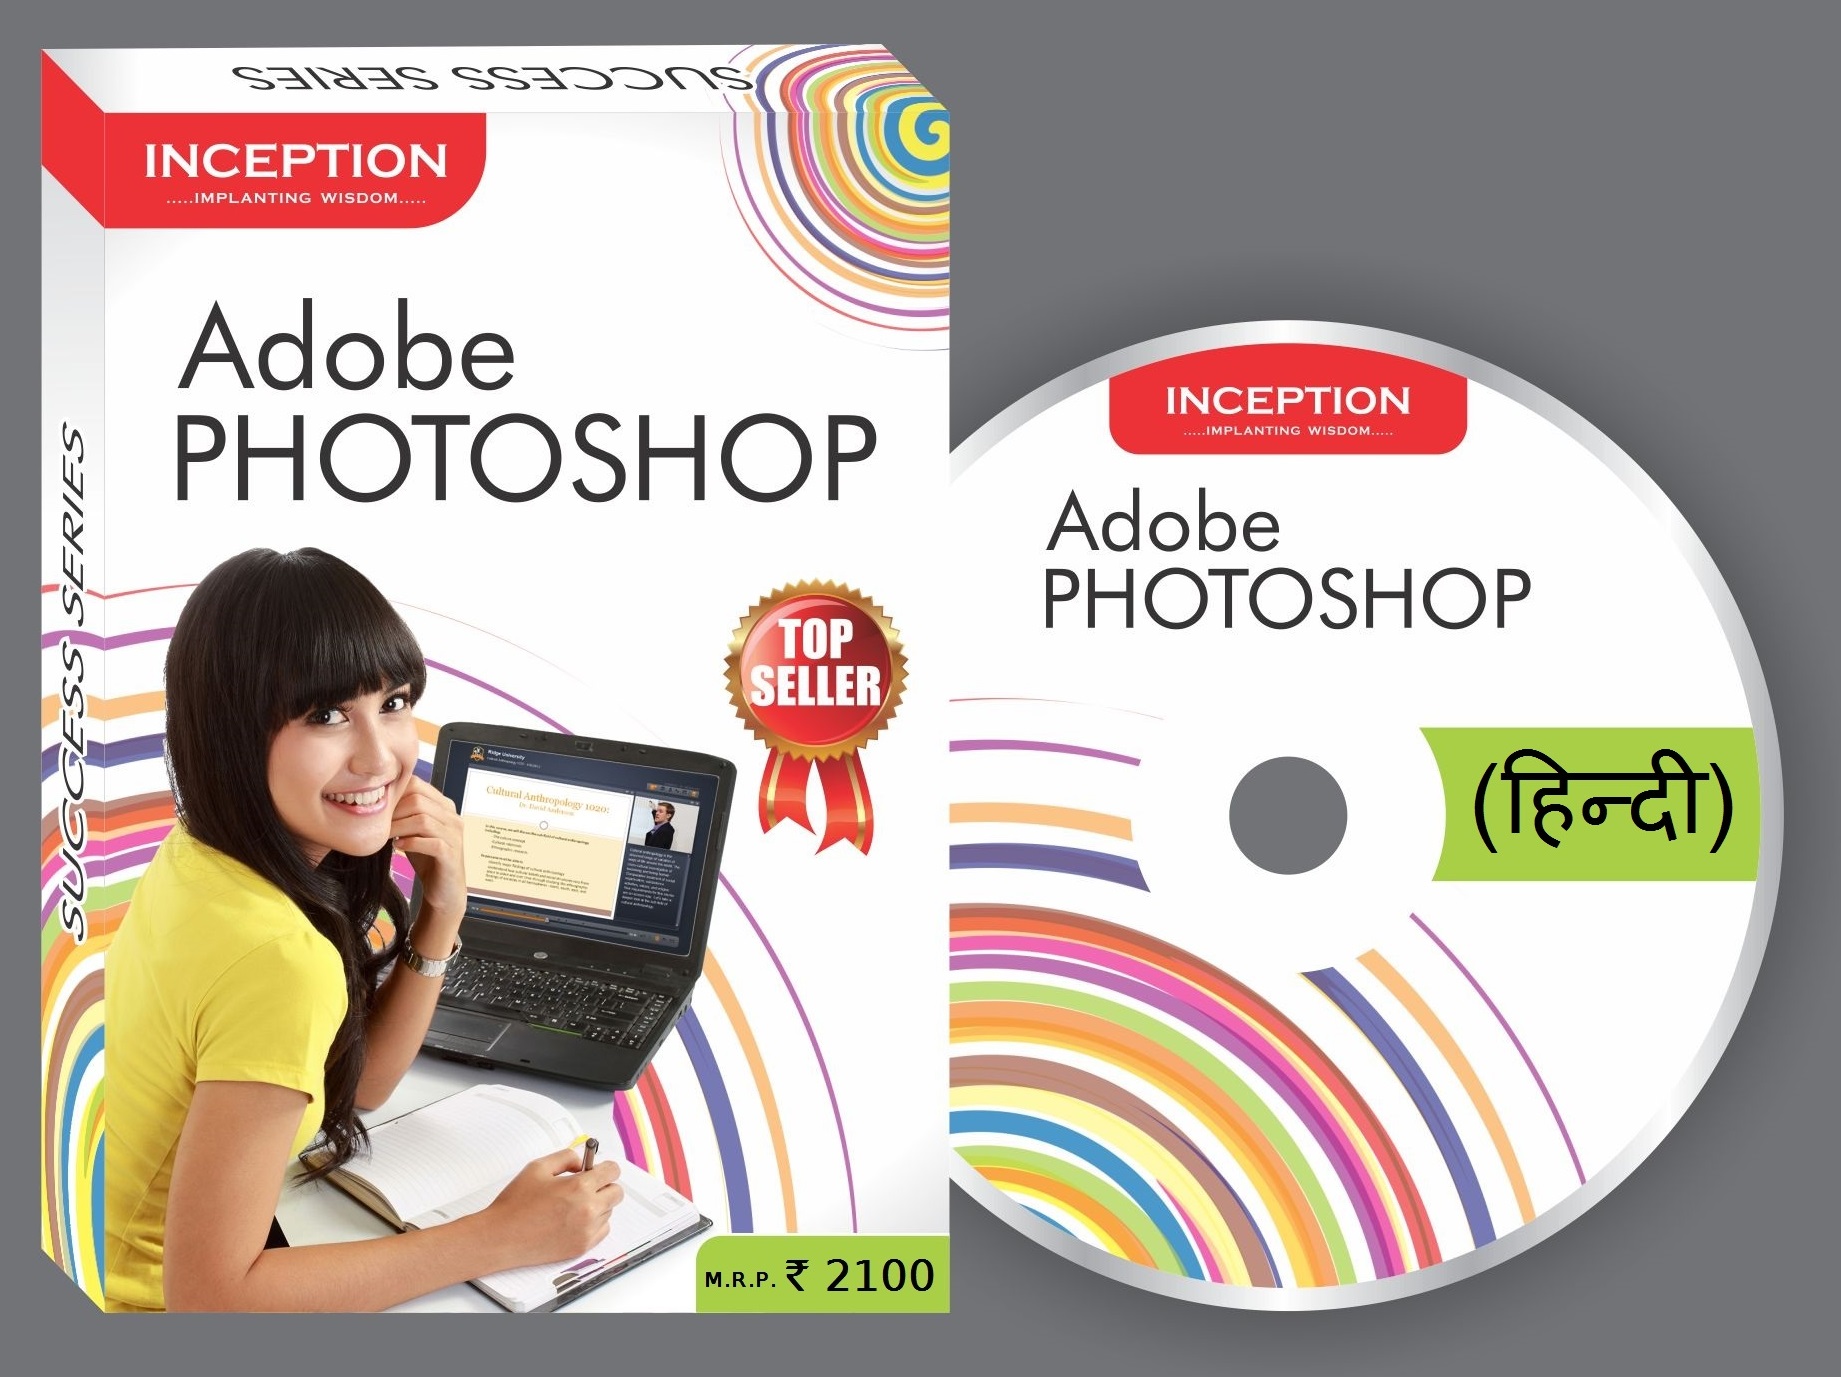 adobe photoshop 7.0 learning book pdf free download in hindi